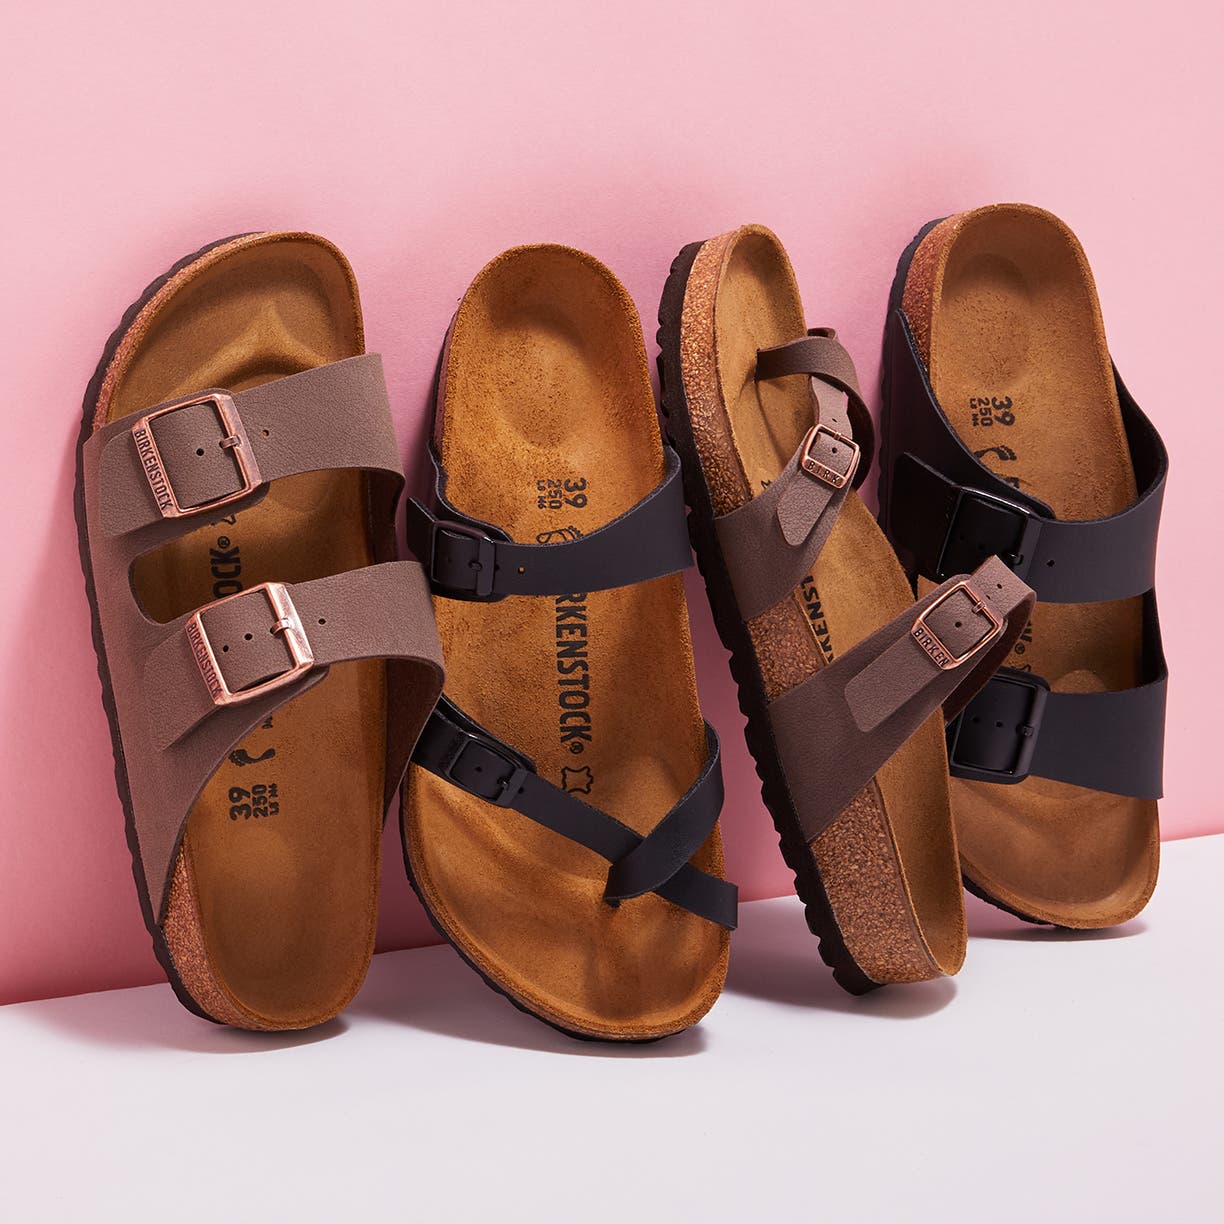 Nordstrom: Birkenstock Women’s Shoes | Walter Baker Up to 75% Off | Franco Sarto Women’s Shoes Up to 60% Off | 7 For All Mankind Up to 70% Off | And more on sale now!